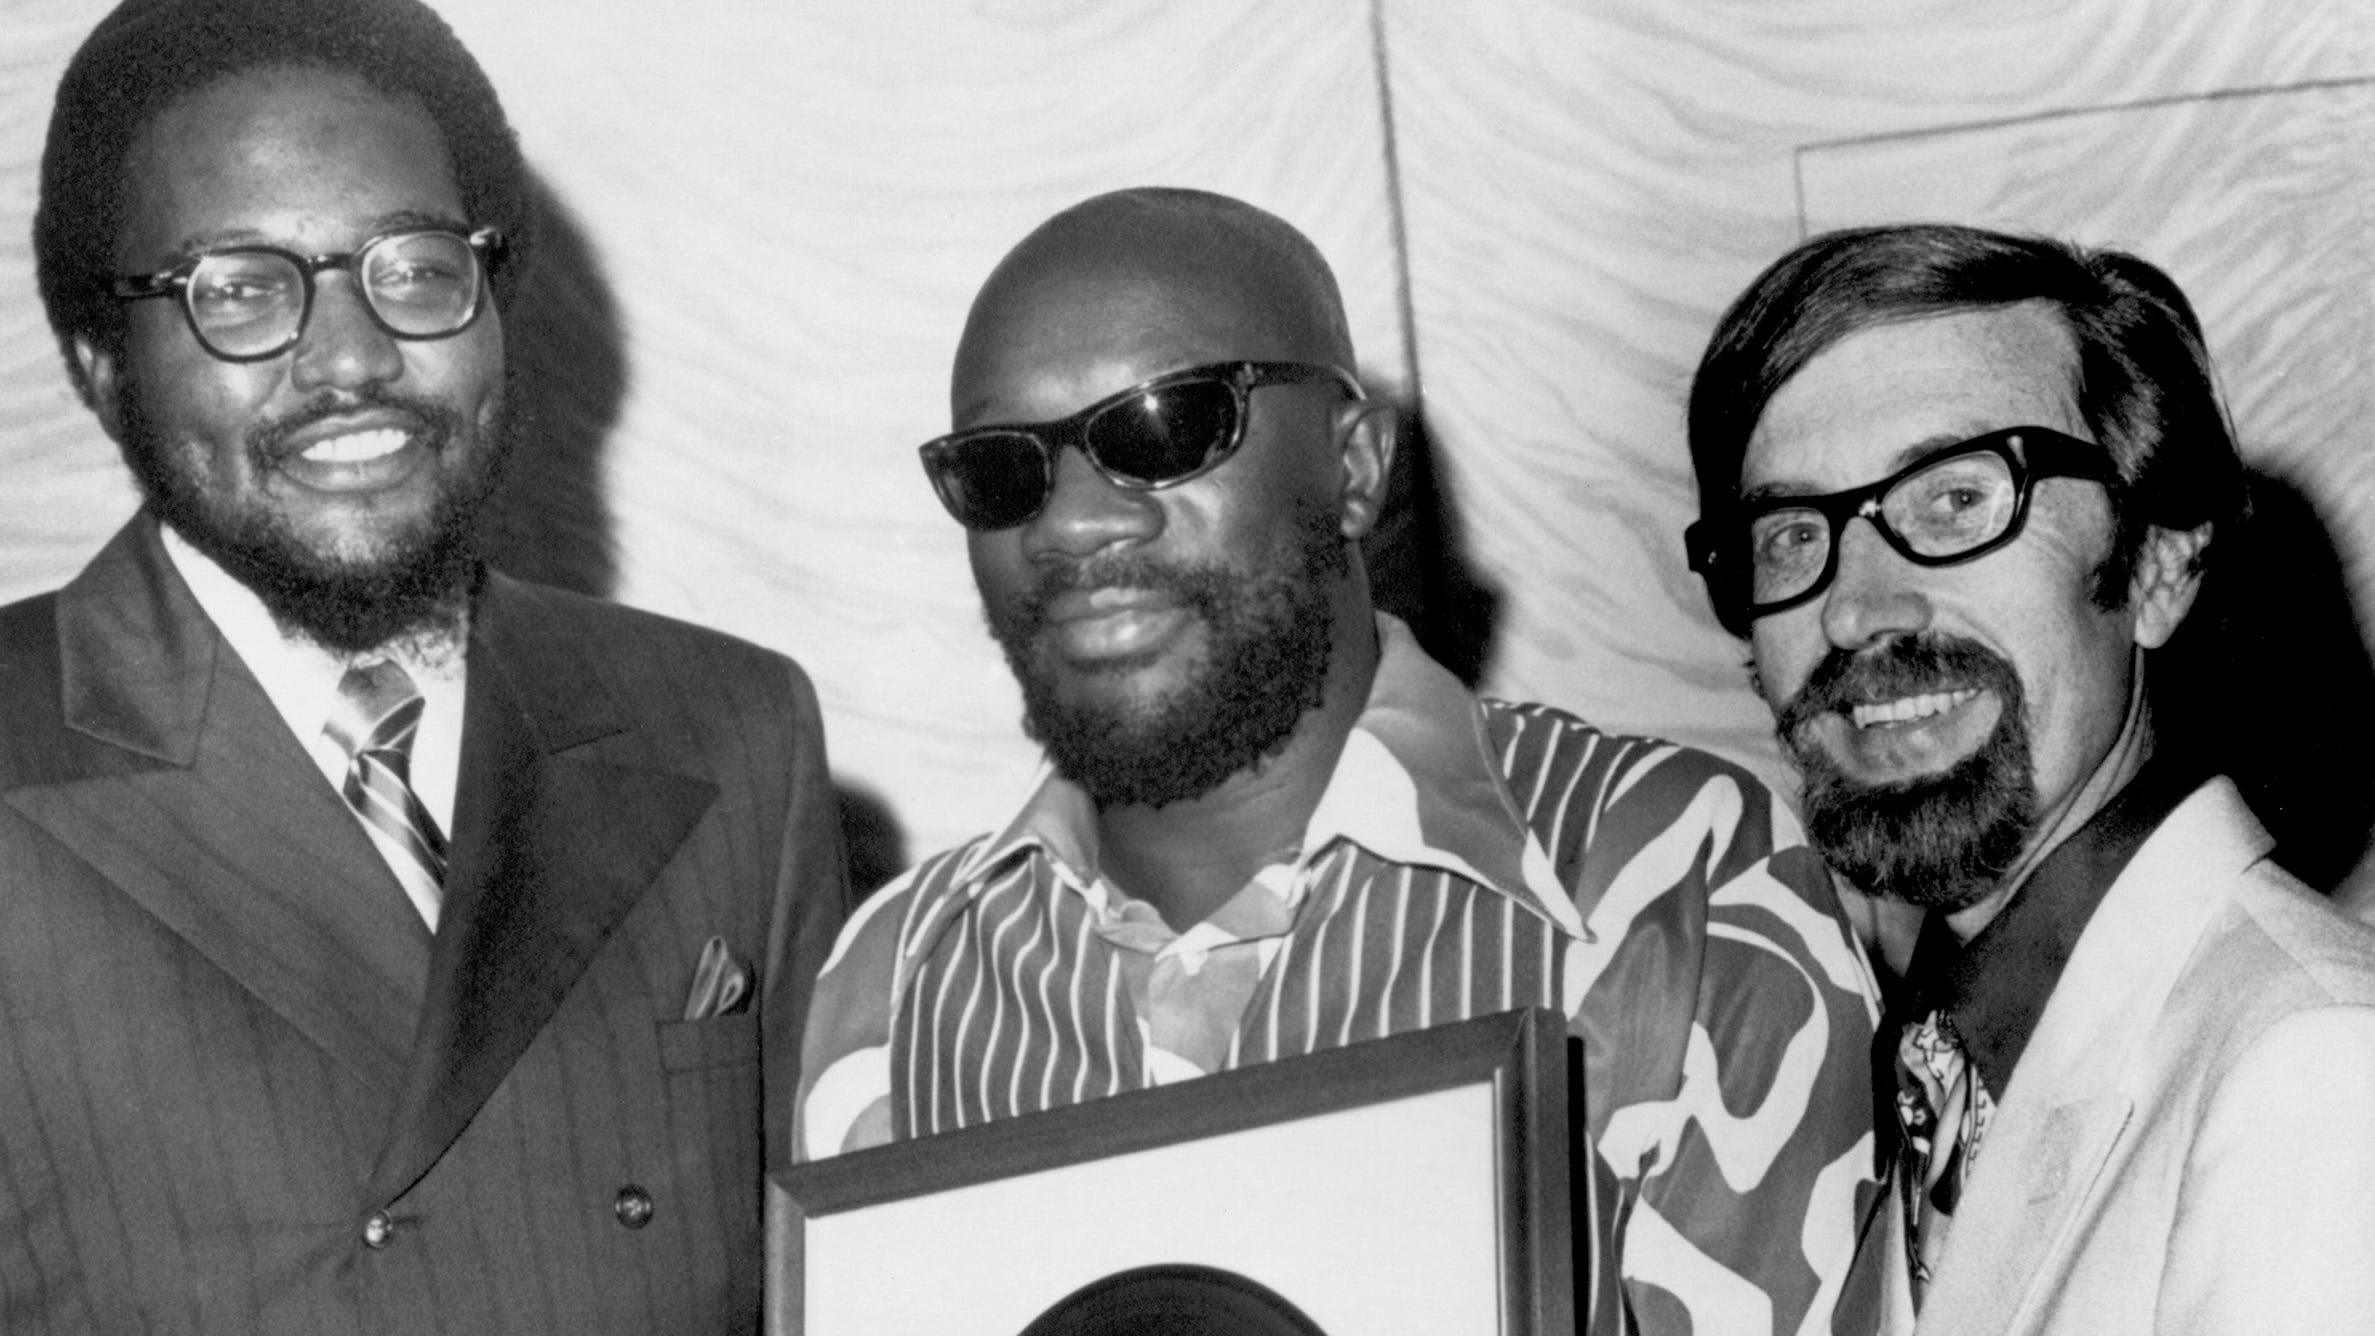 'Stax' doc looks at extraordinary music studio that fell to financial and racial struggles